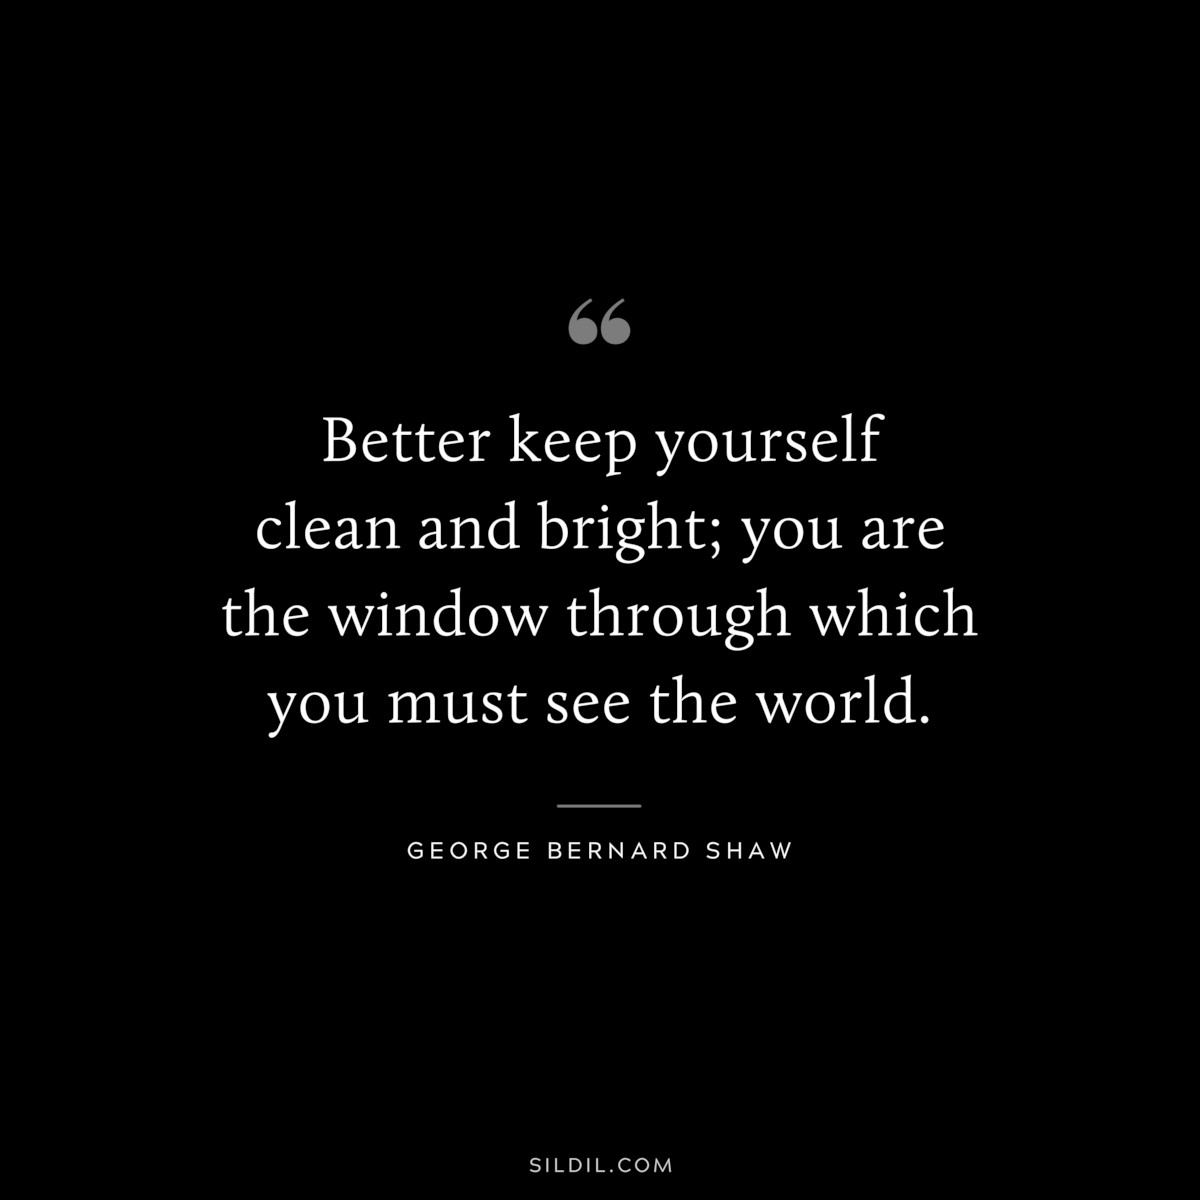 Better keep yourself clean and bright; you are the window through which you must see the world. ― George Bernard Shaw